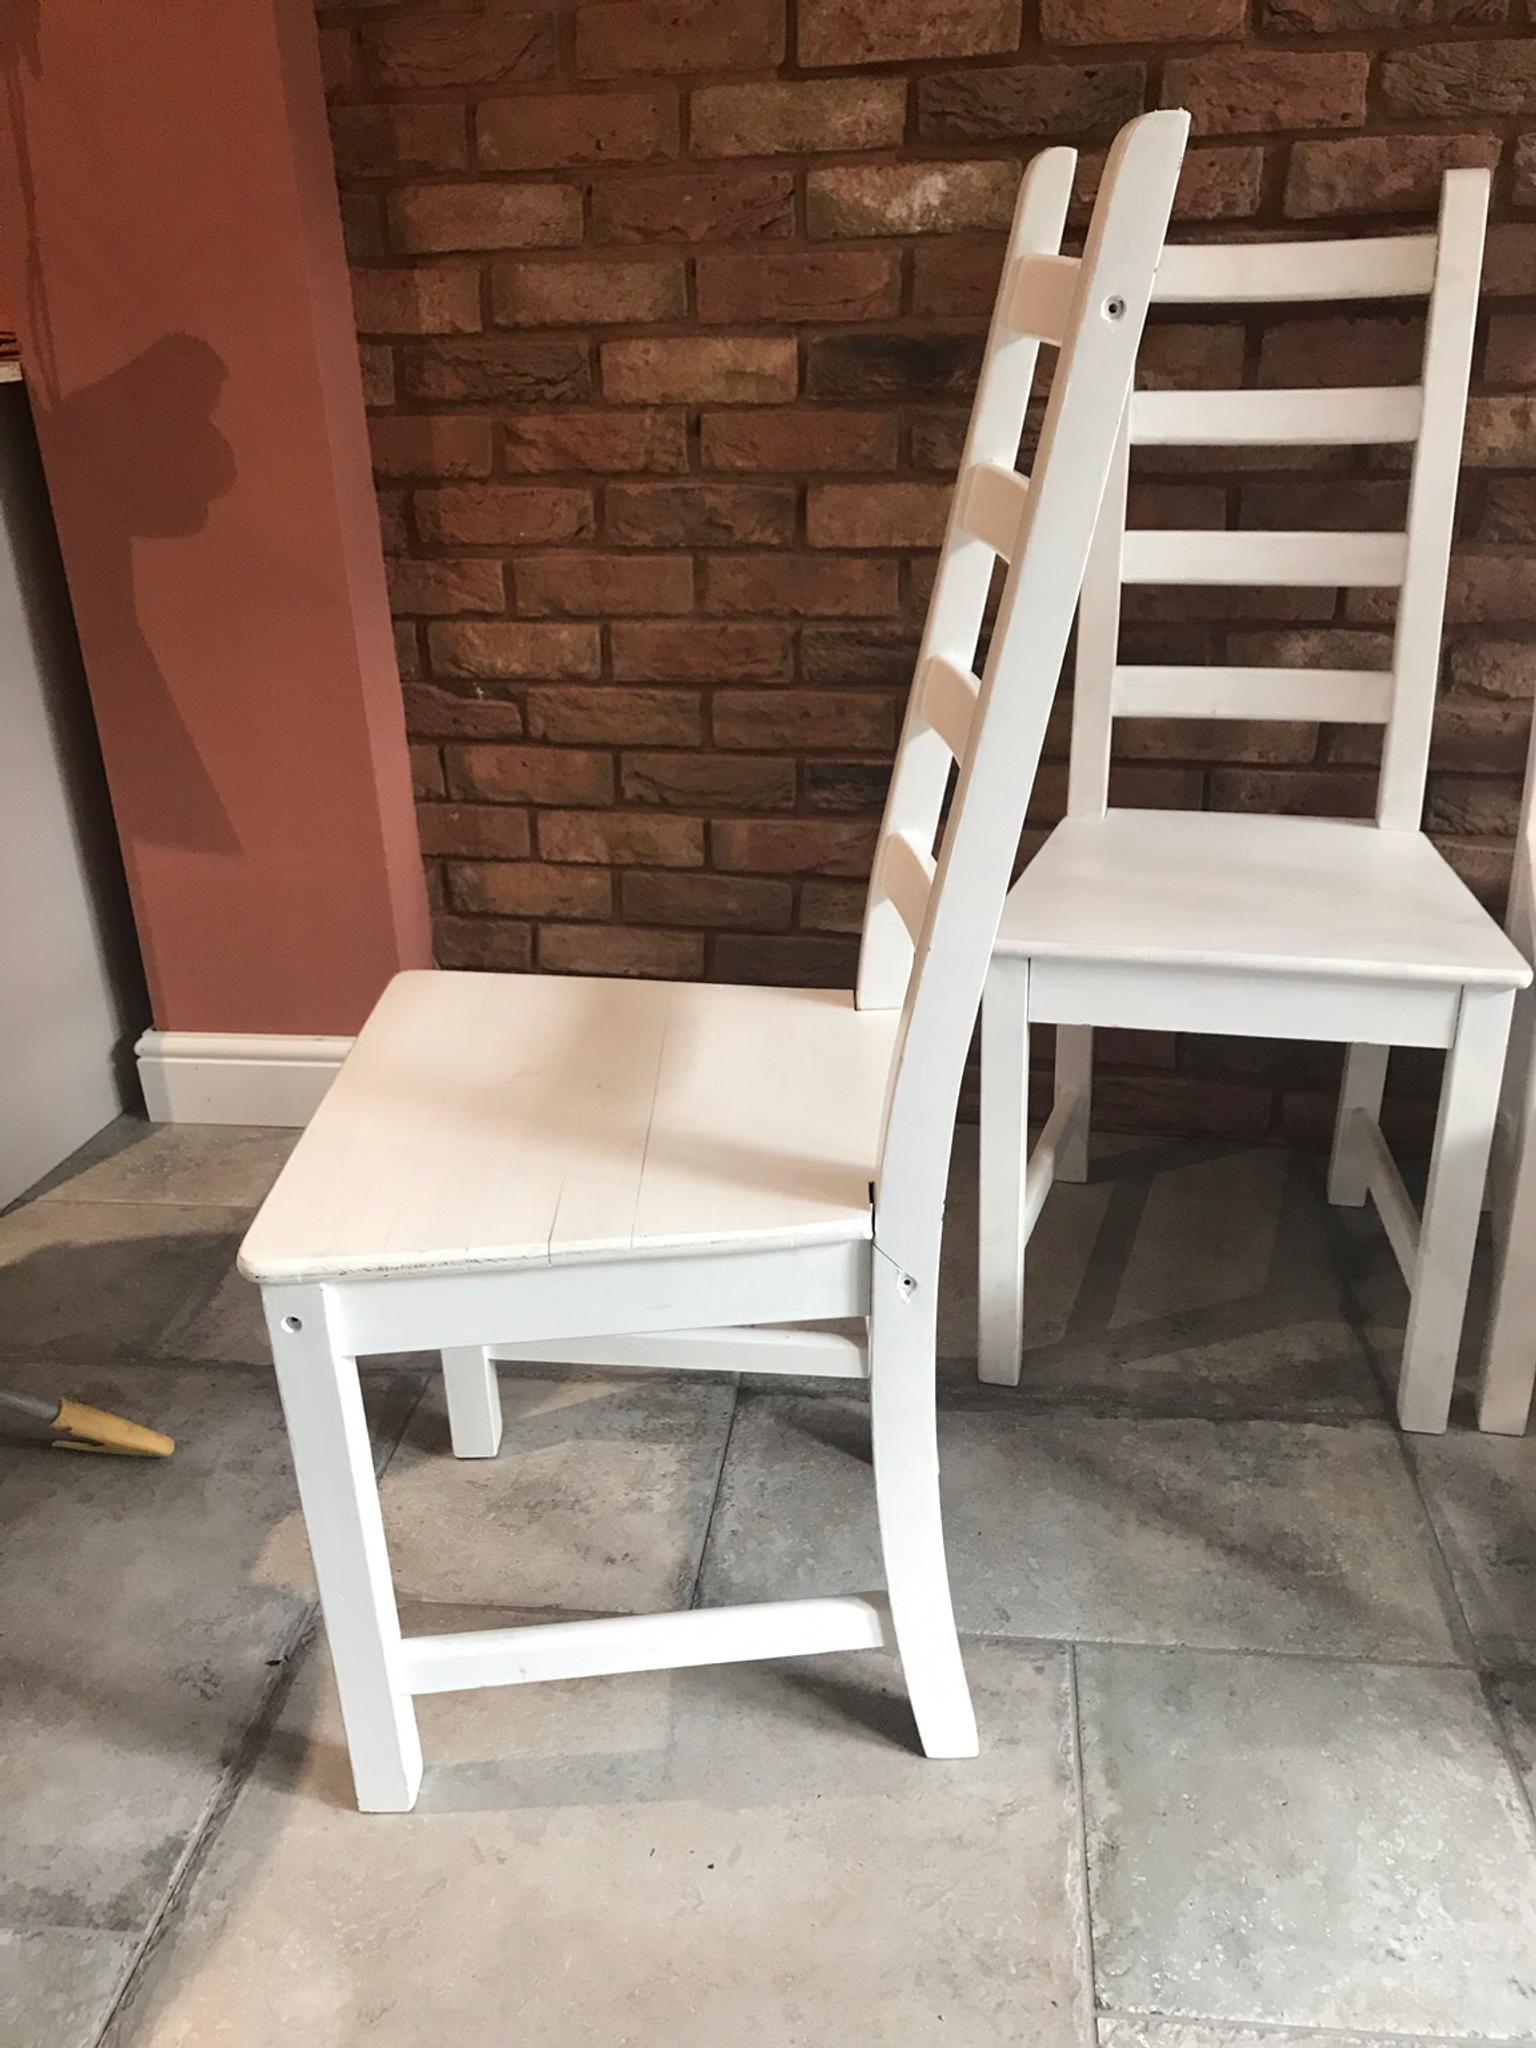 Ikea Kaustby Wooden Dining Chairs In Ws13 Lichfield For 100 00